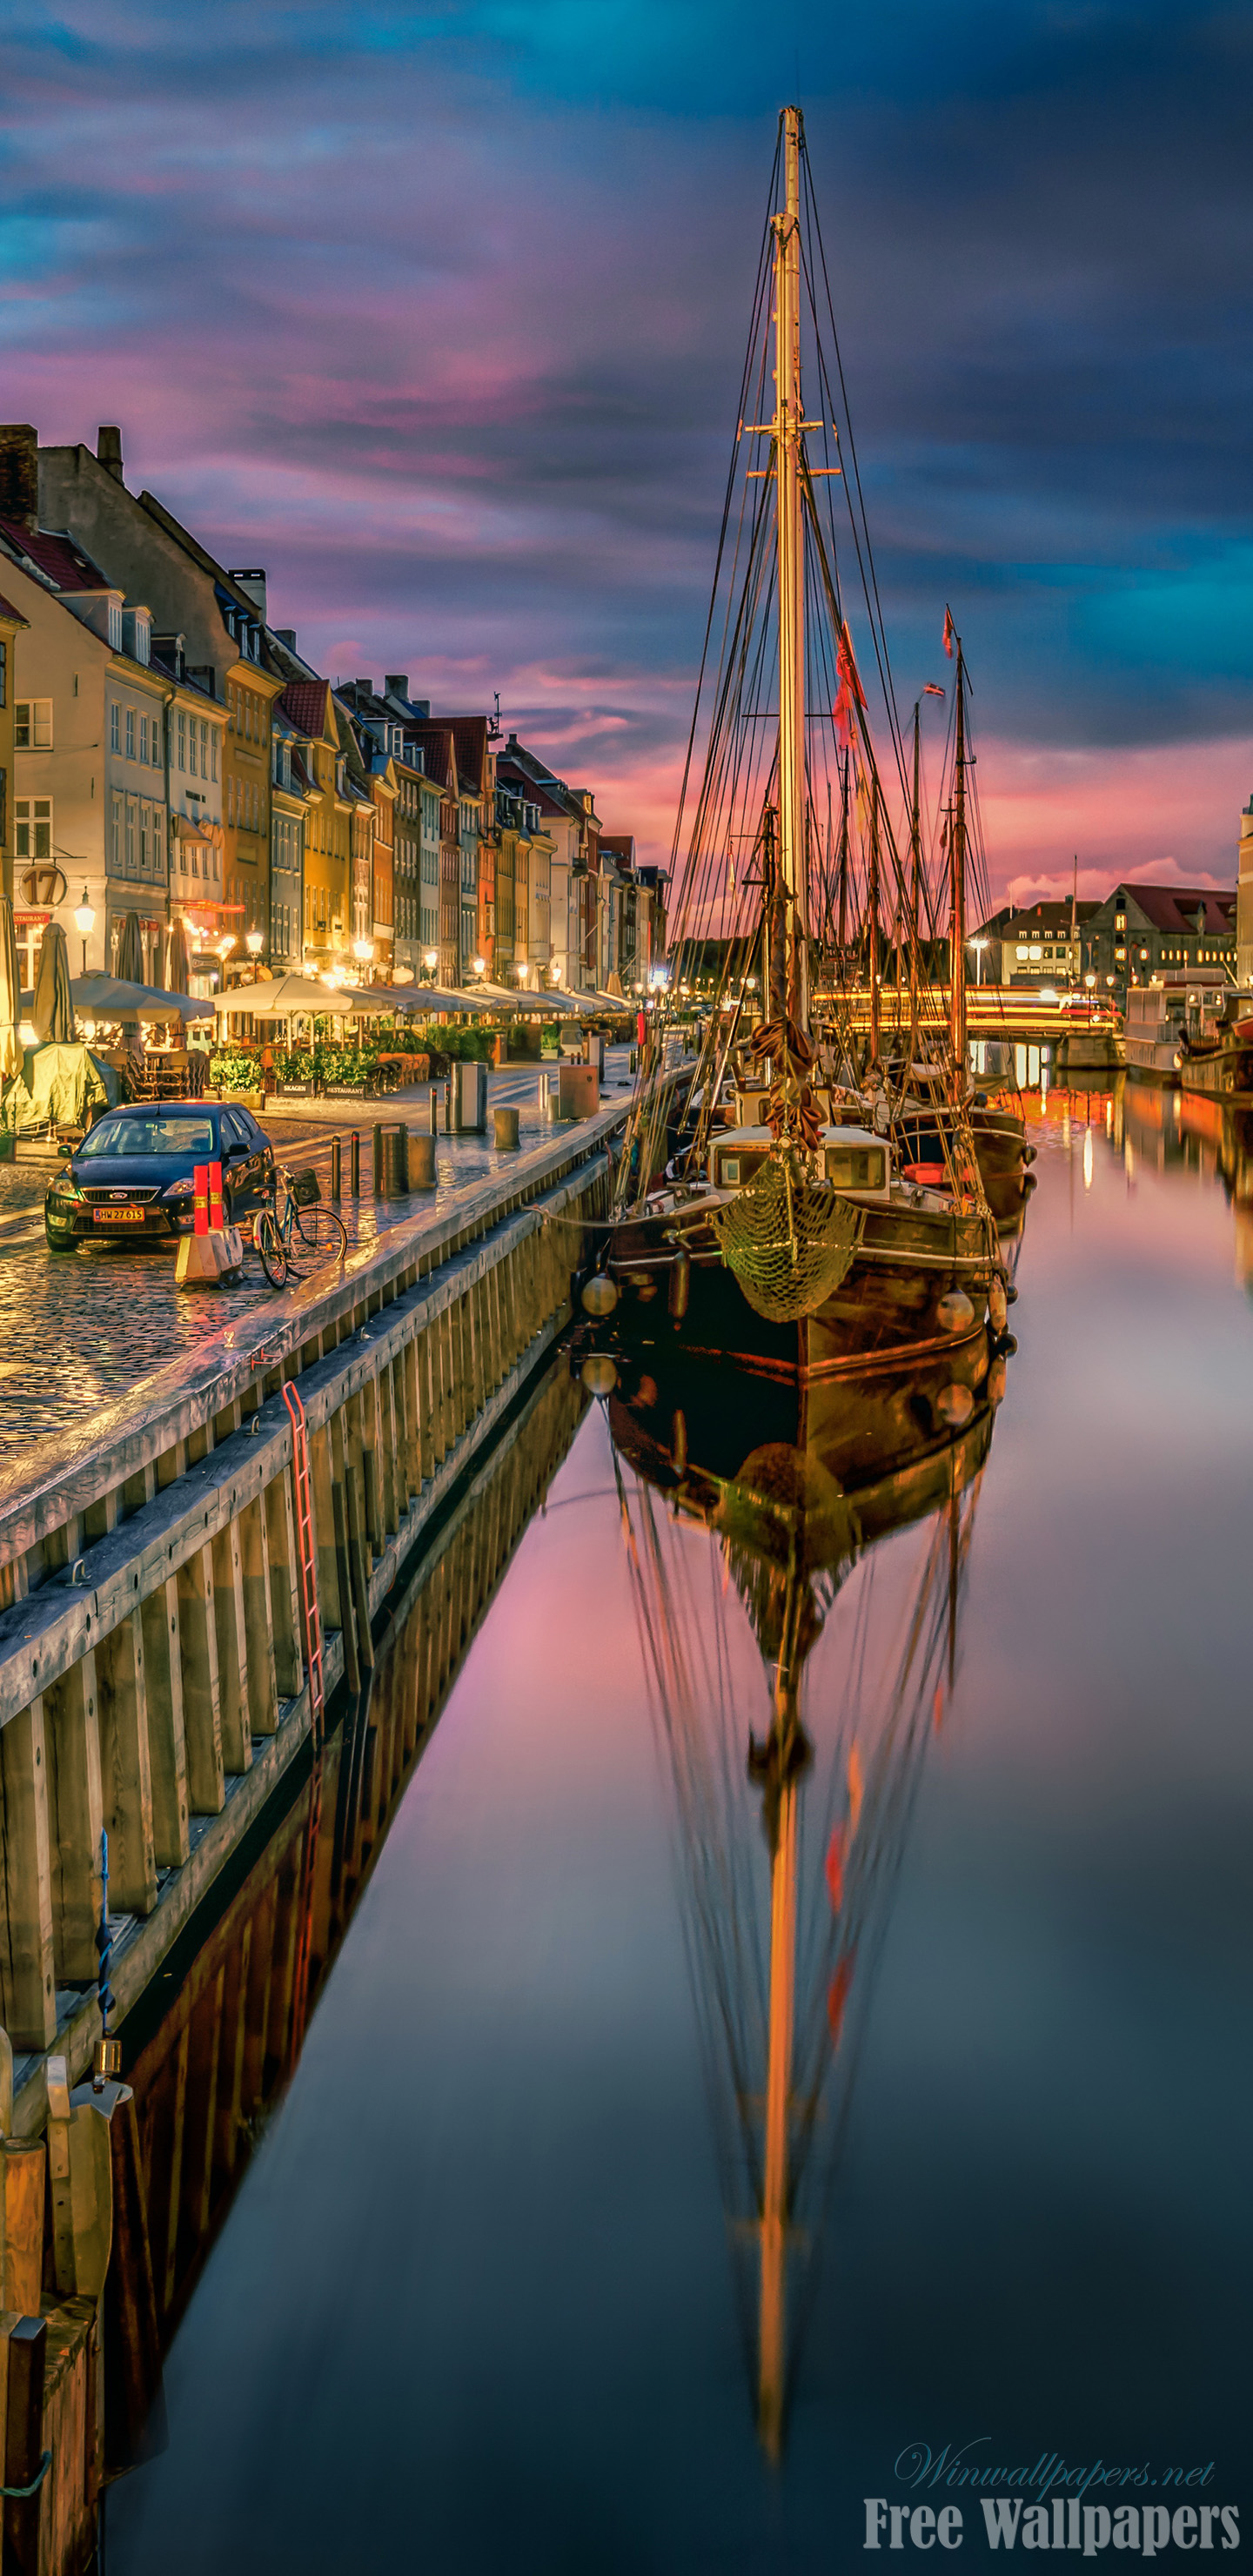 Copenhagen Wallpapers For Note Hd Wallpapers For Note 8 1440x2960 Wallpaper Teahub Io